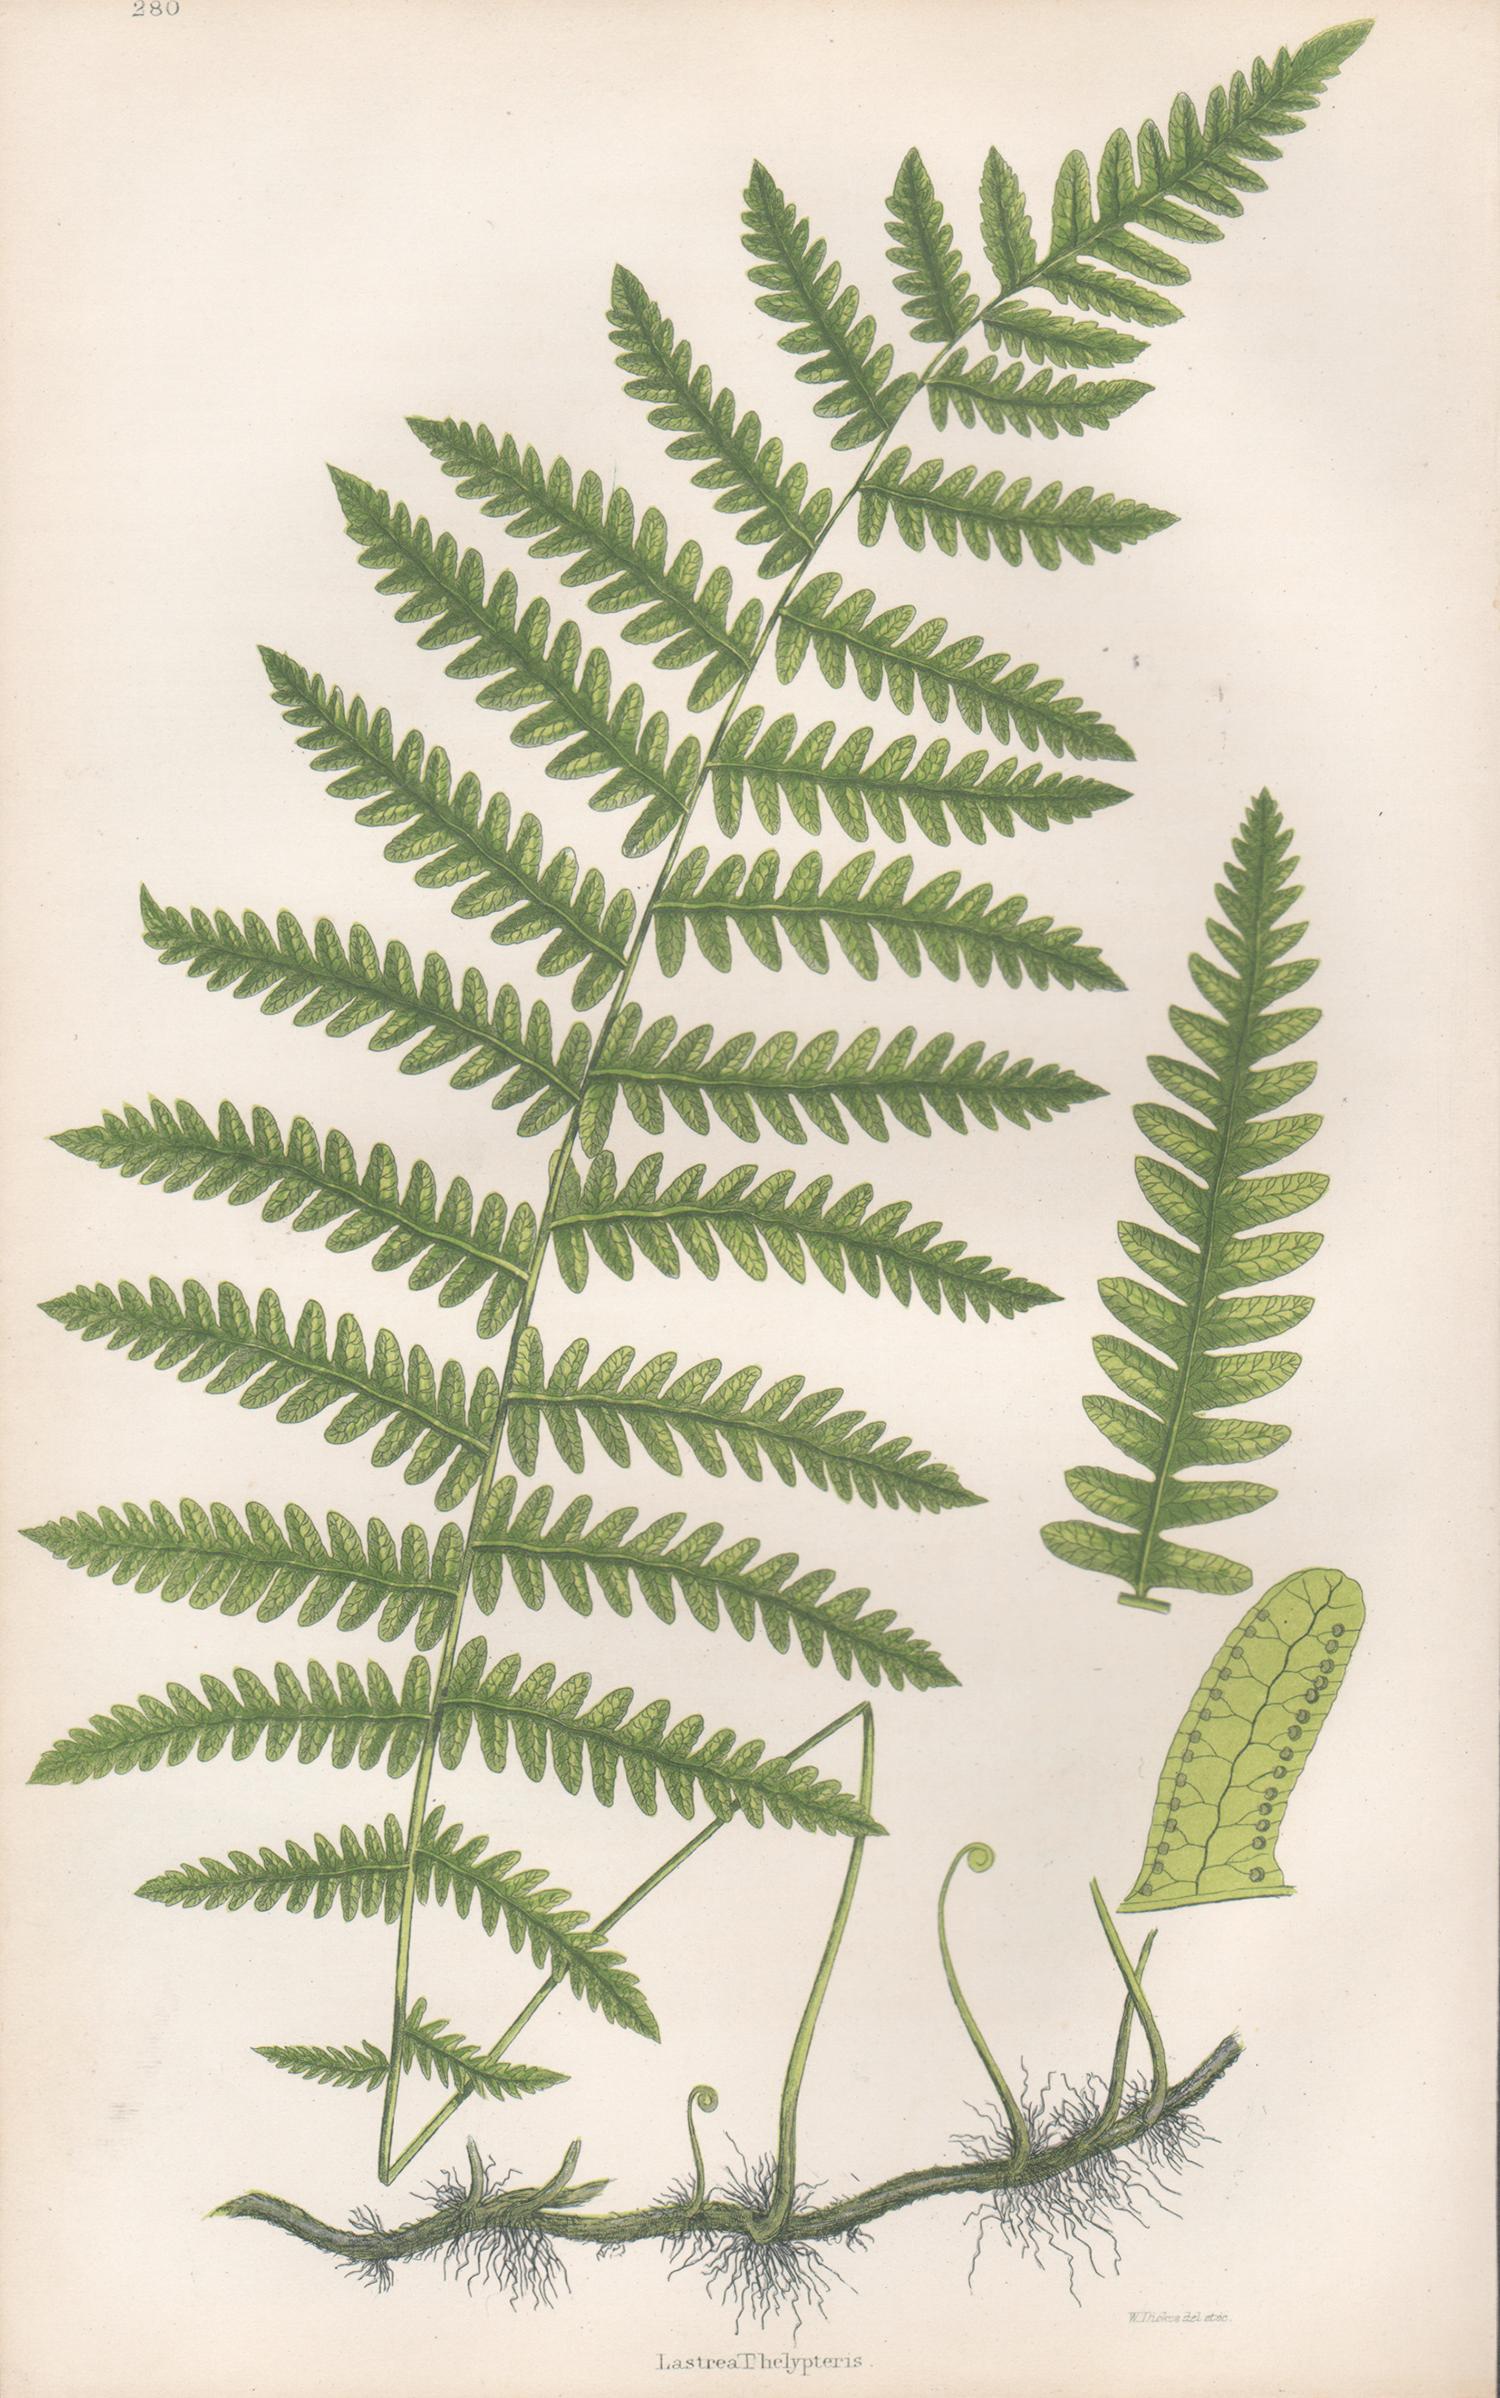 Collection of 22 antique fern botanical woodblock prints

Antique 19th century fern colour woodblocks by William Dickes, circa 1865.

225mm by 135mm (sheet)

William Dickes (1815-1892) was an English illustrator, engraver, printmaker and